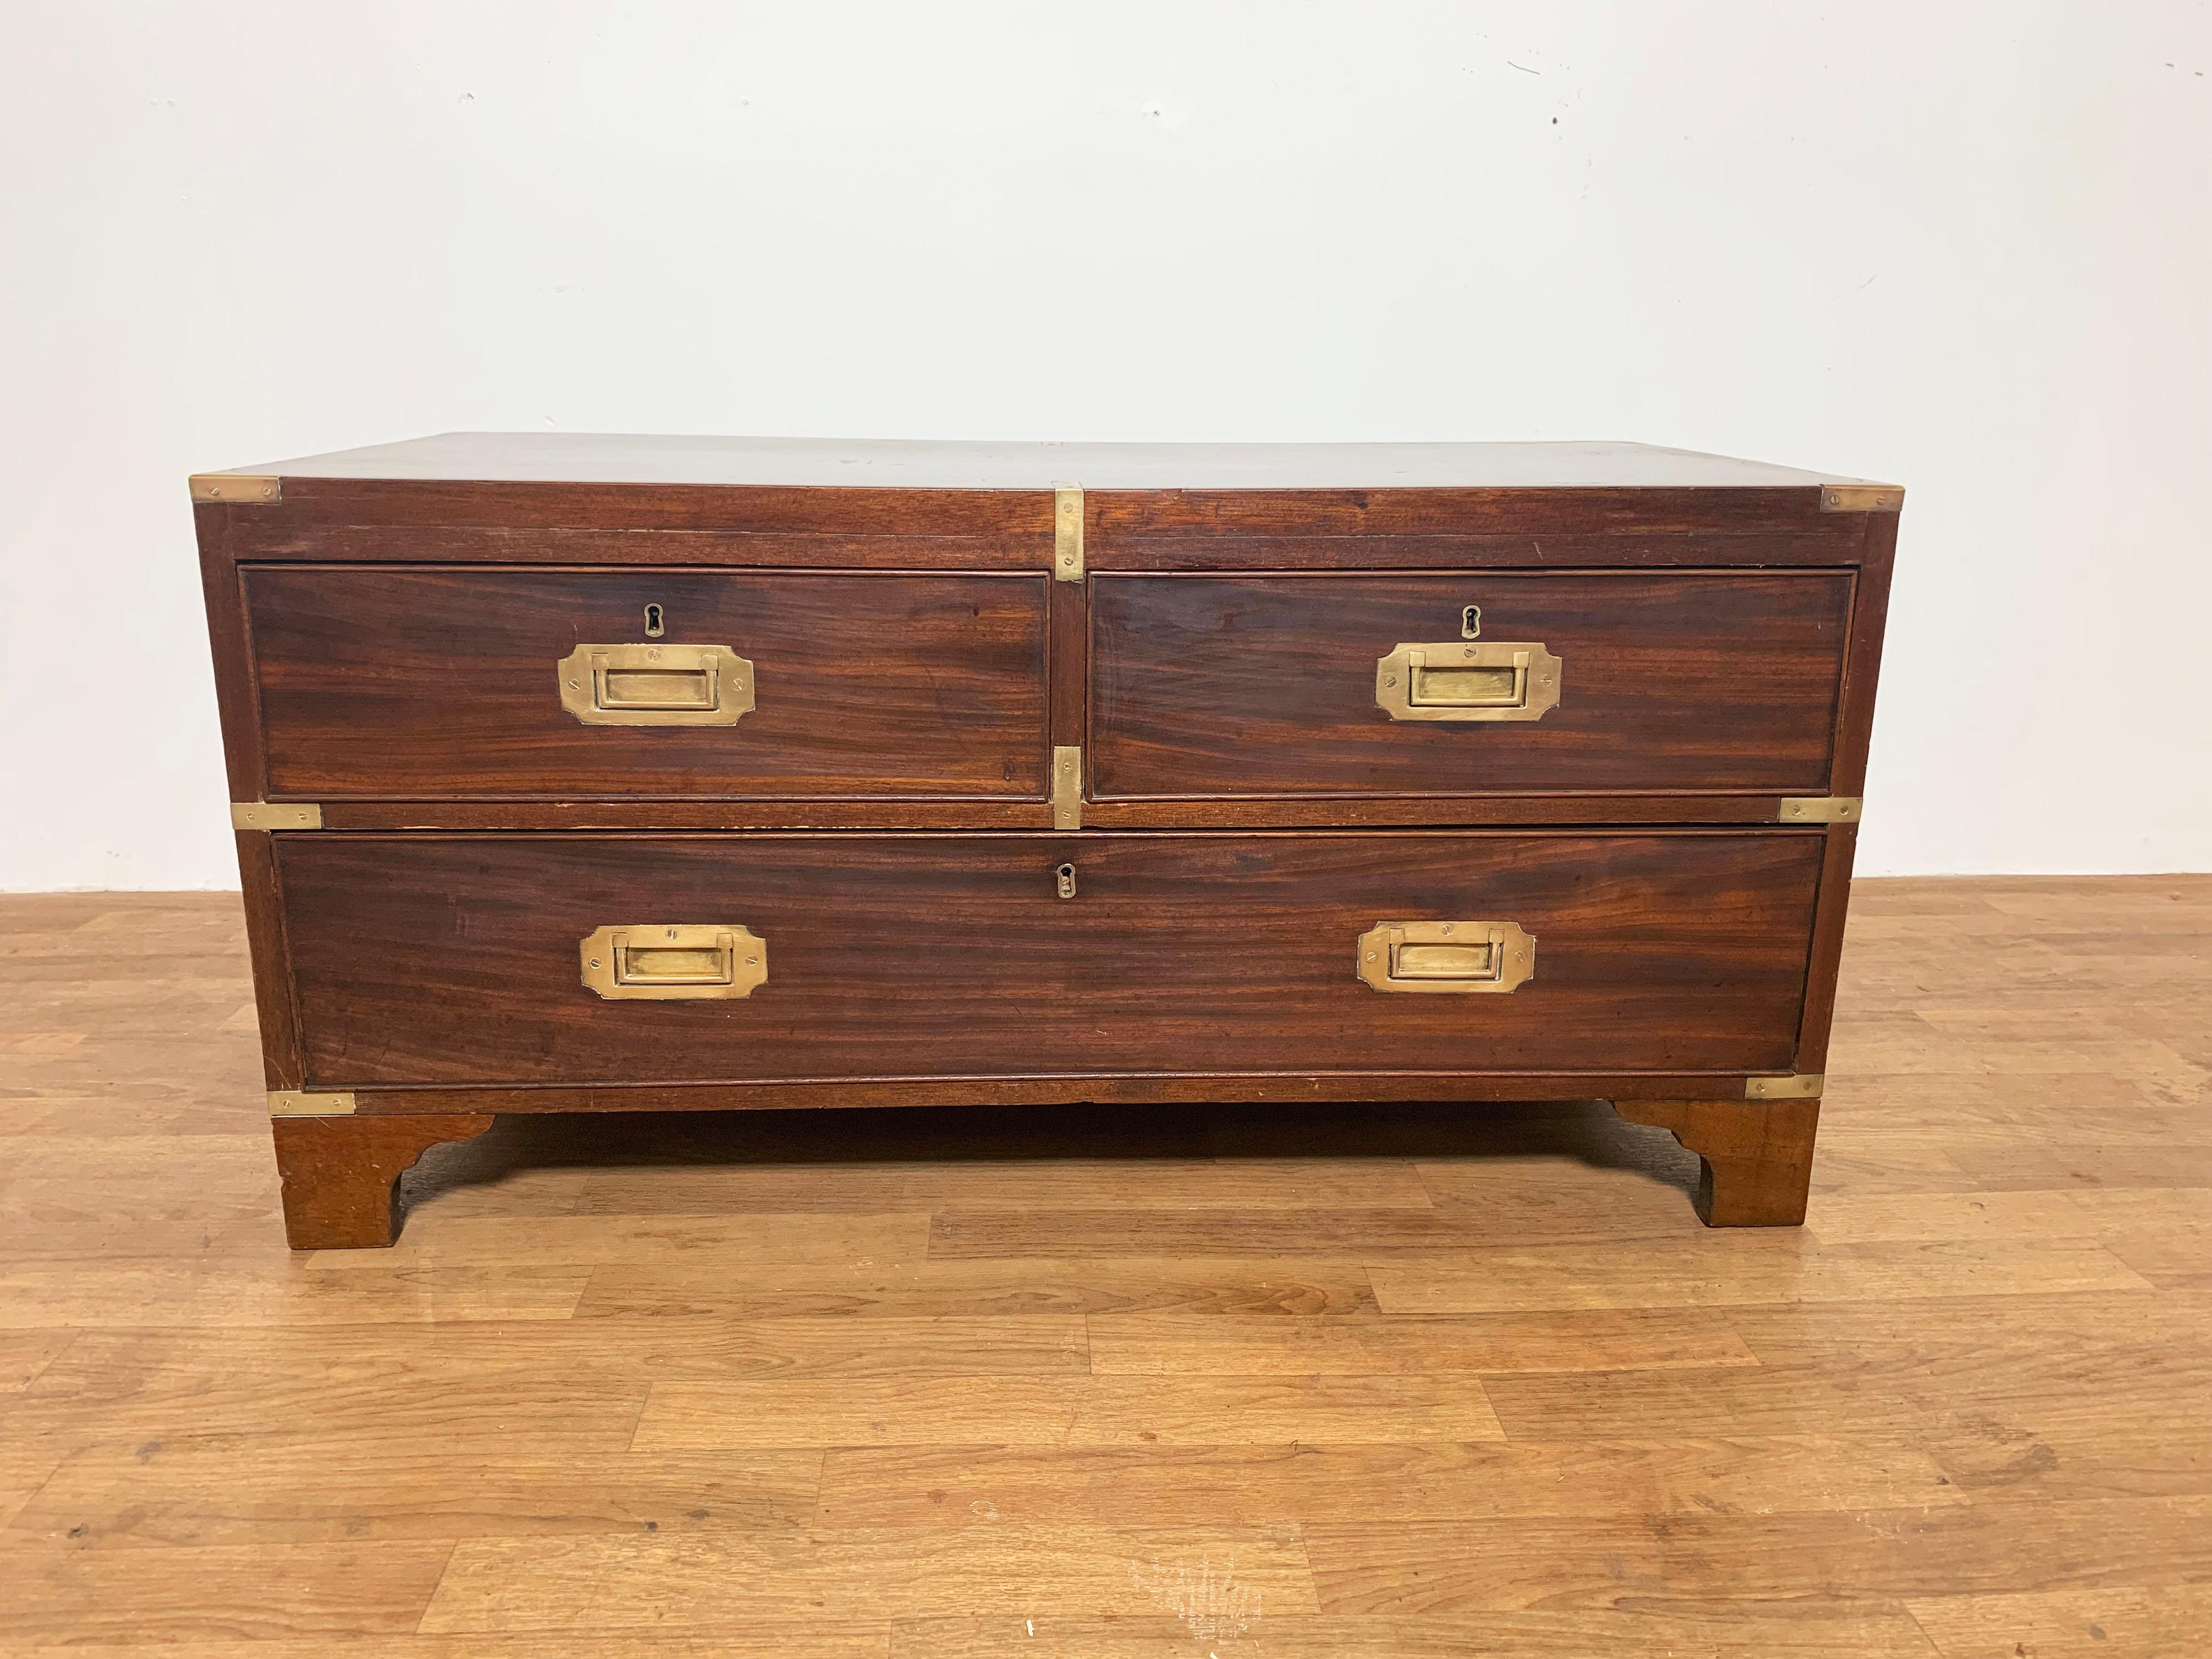 Low mahogany chest of two drawers once served as a trunk platform but is the perfect height for a modern coffee table. It dates to the 1870s. The unfinished back still bears remnants of a label from a 19th century furniture warehouse in Cheltenham